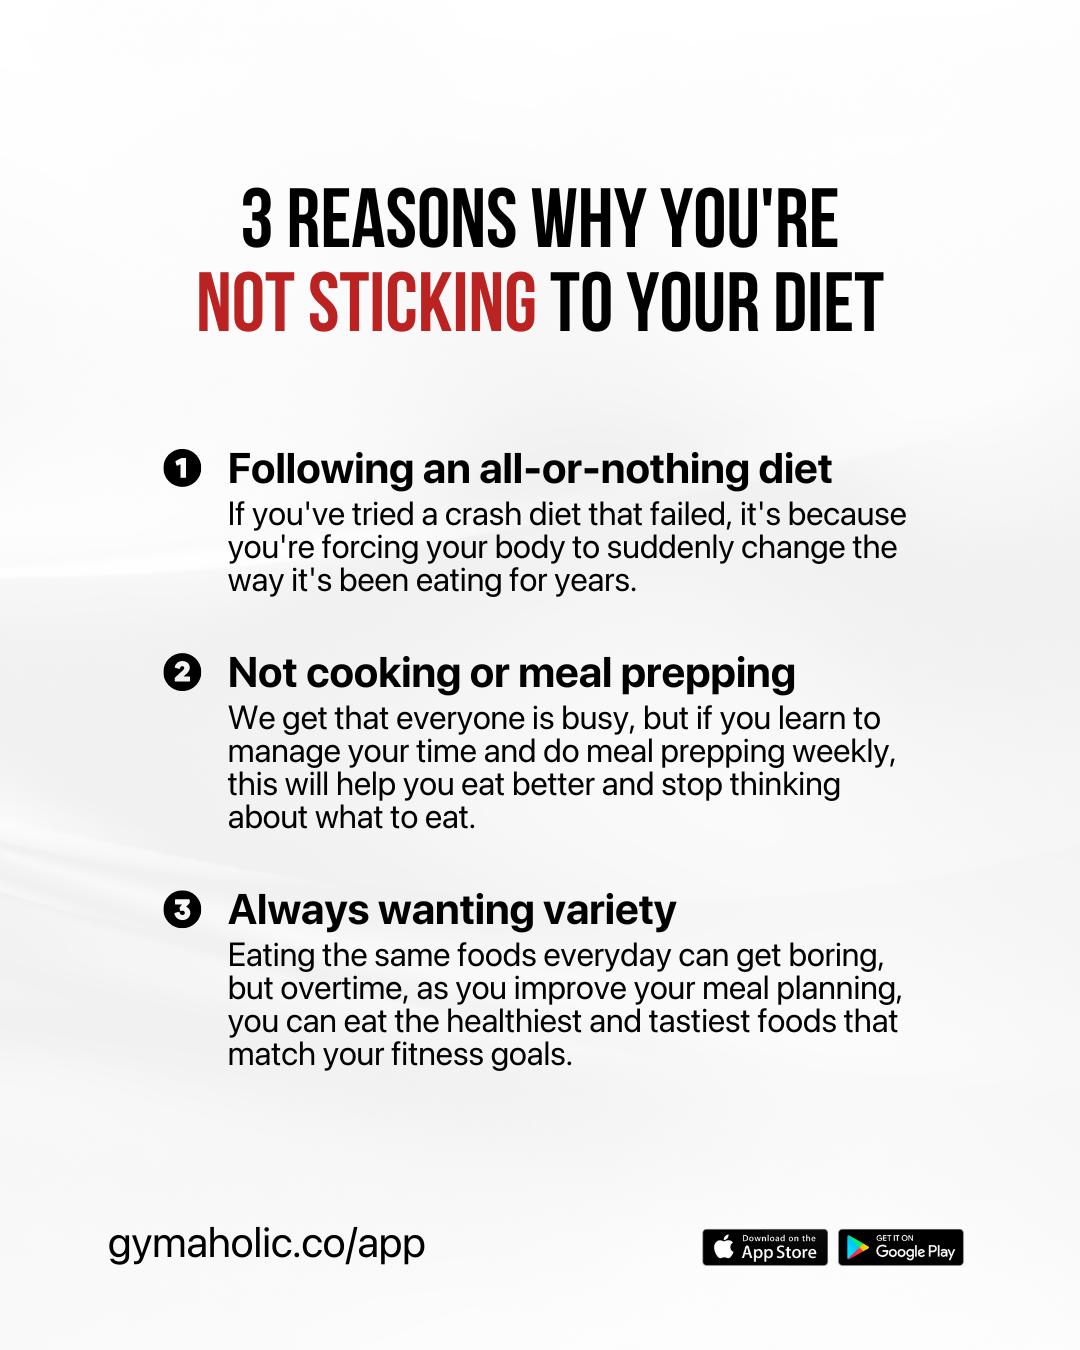 3 Reasons Why You’re Not Sticking To Your Diet